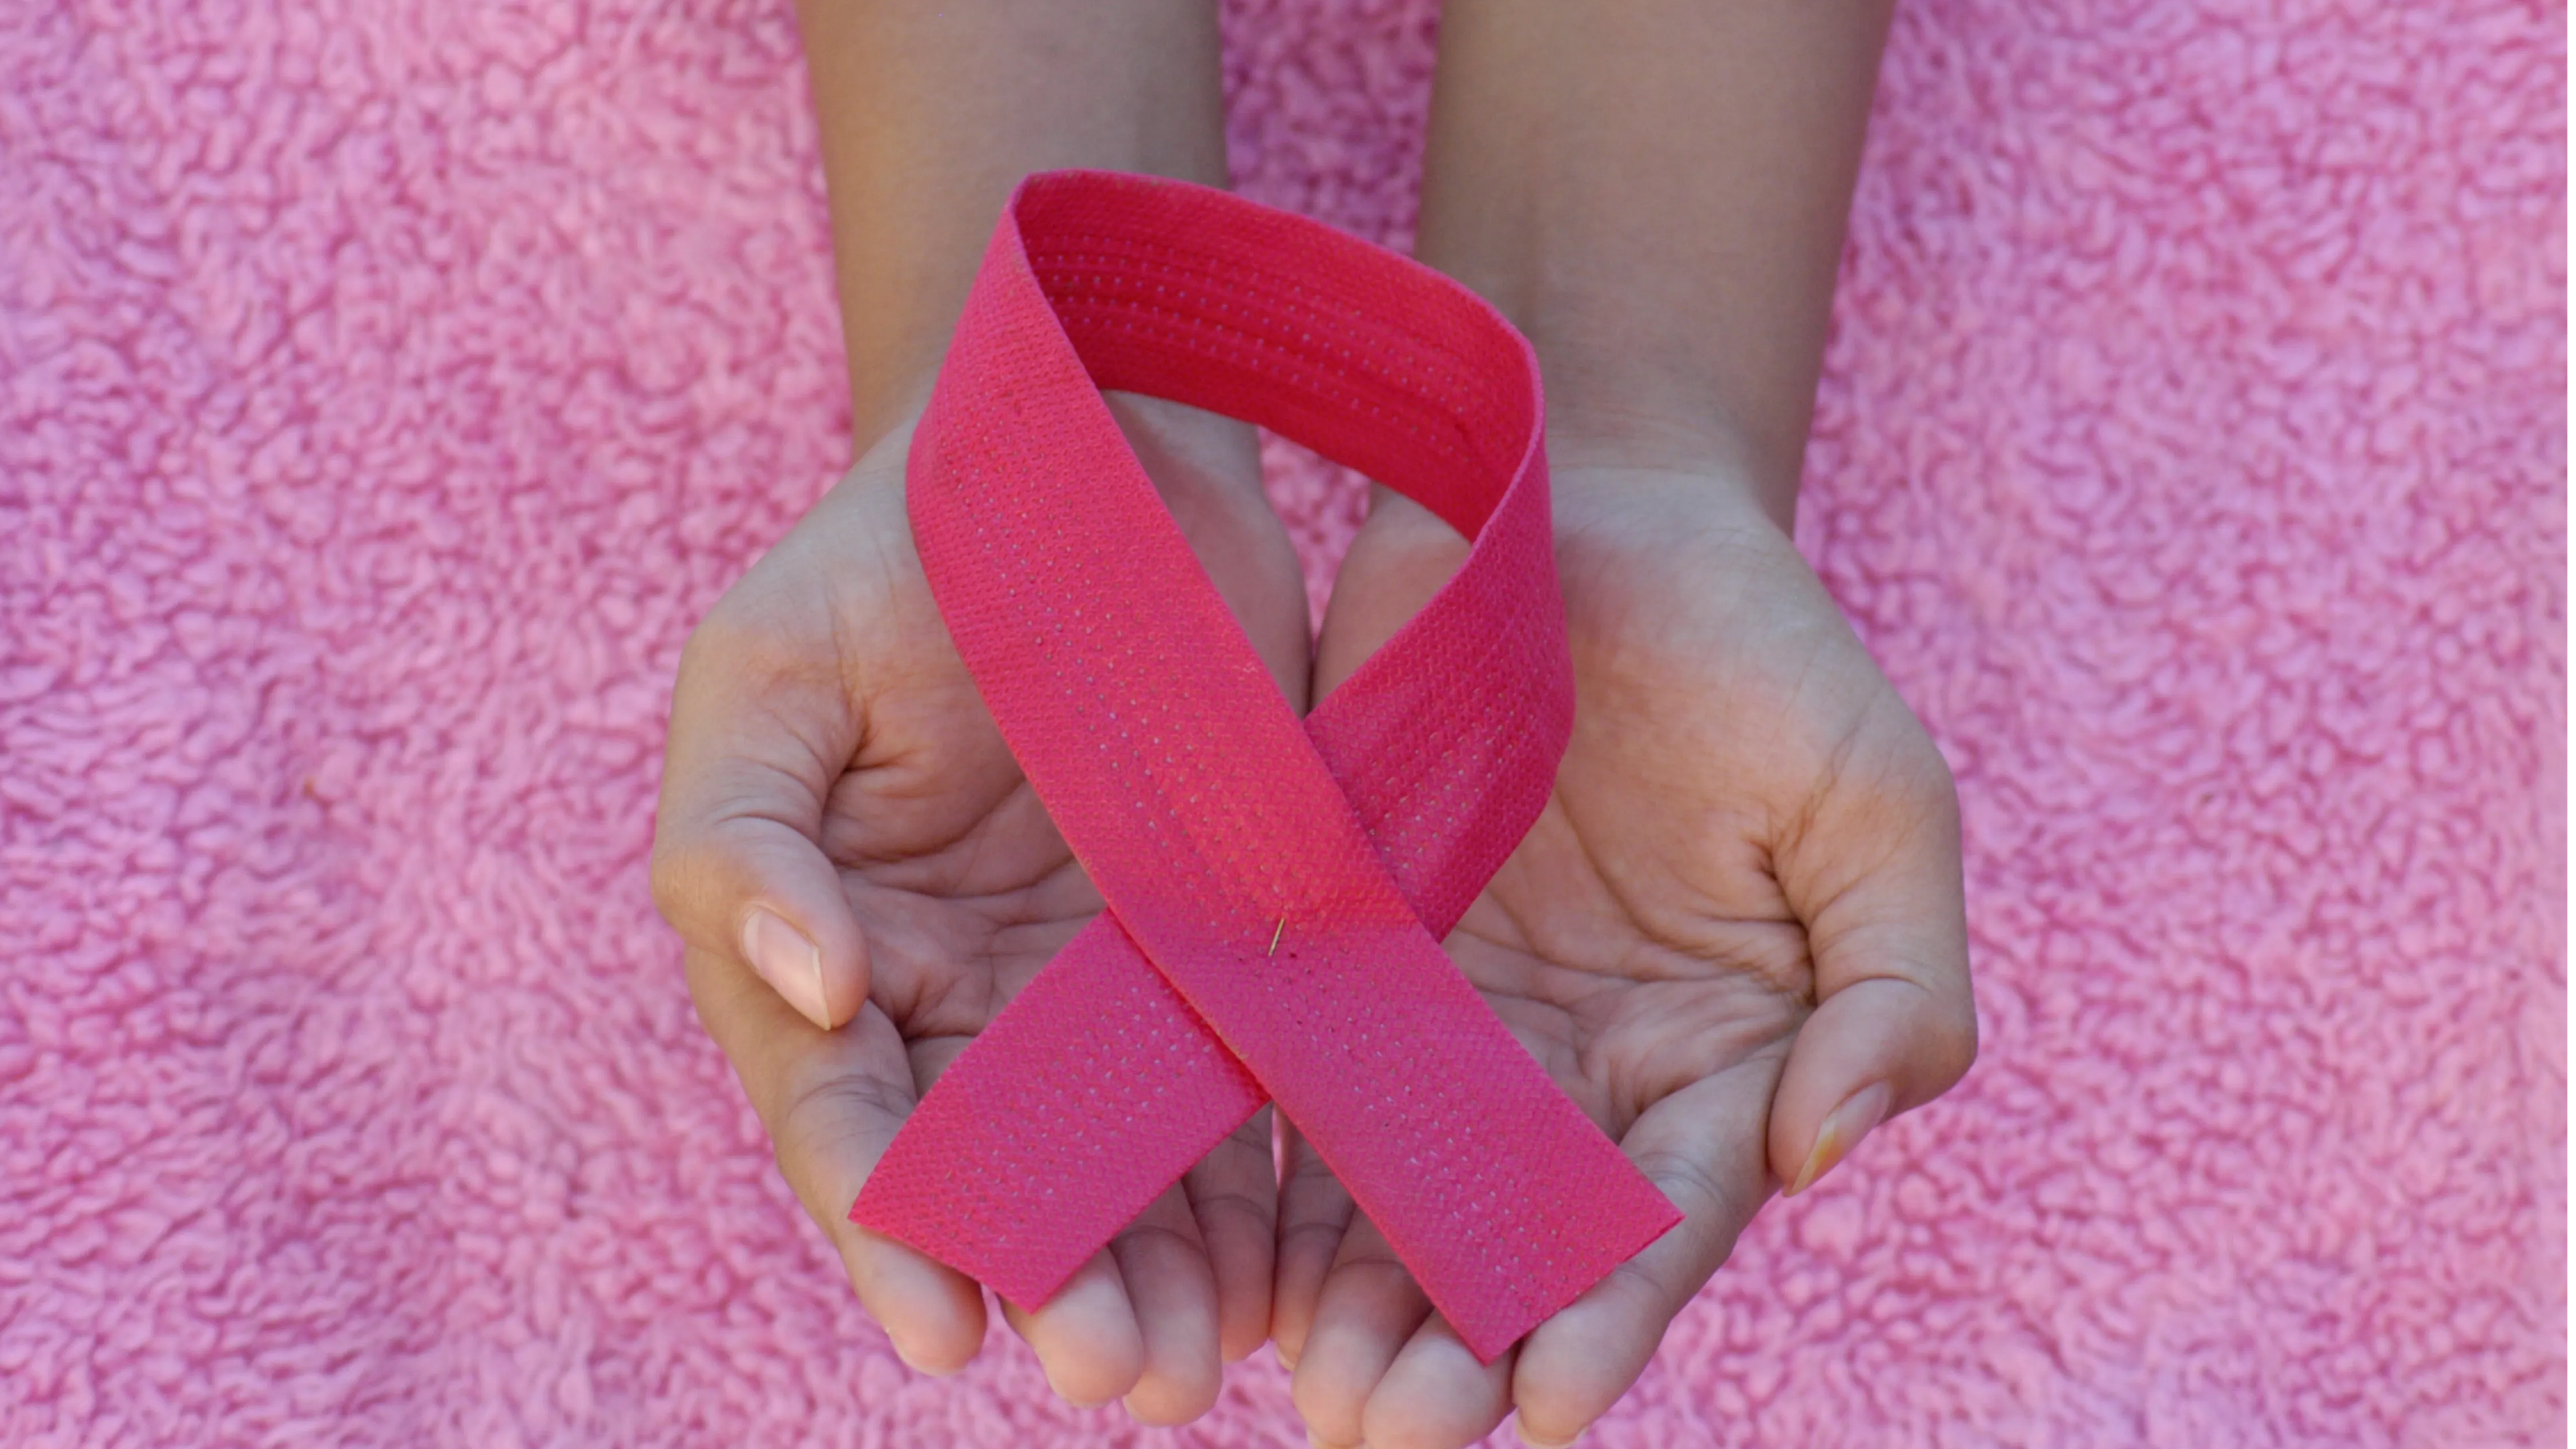 Lumps arent the only sign of breast cancer. Check out these 5 others